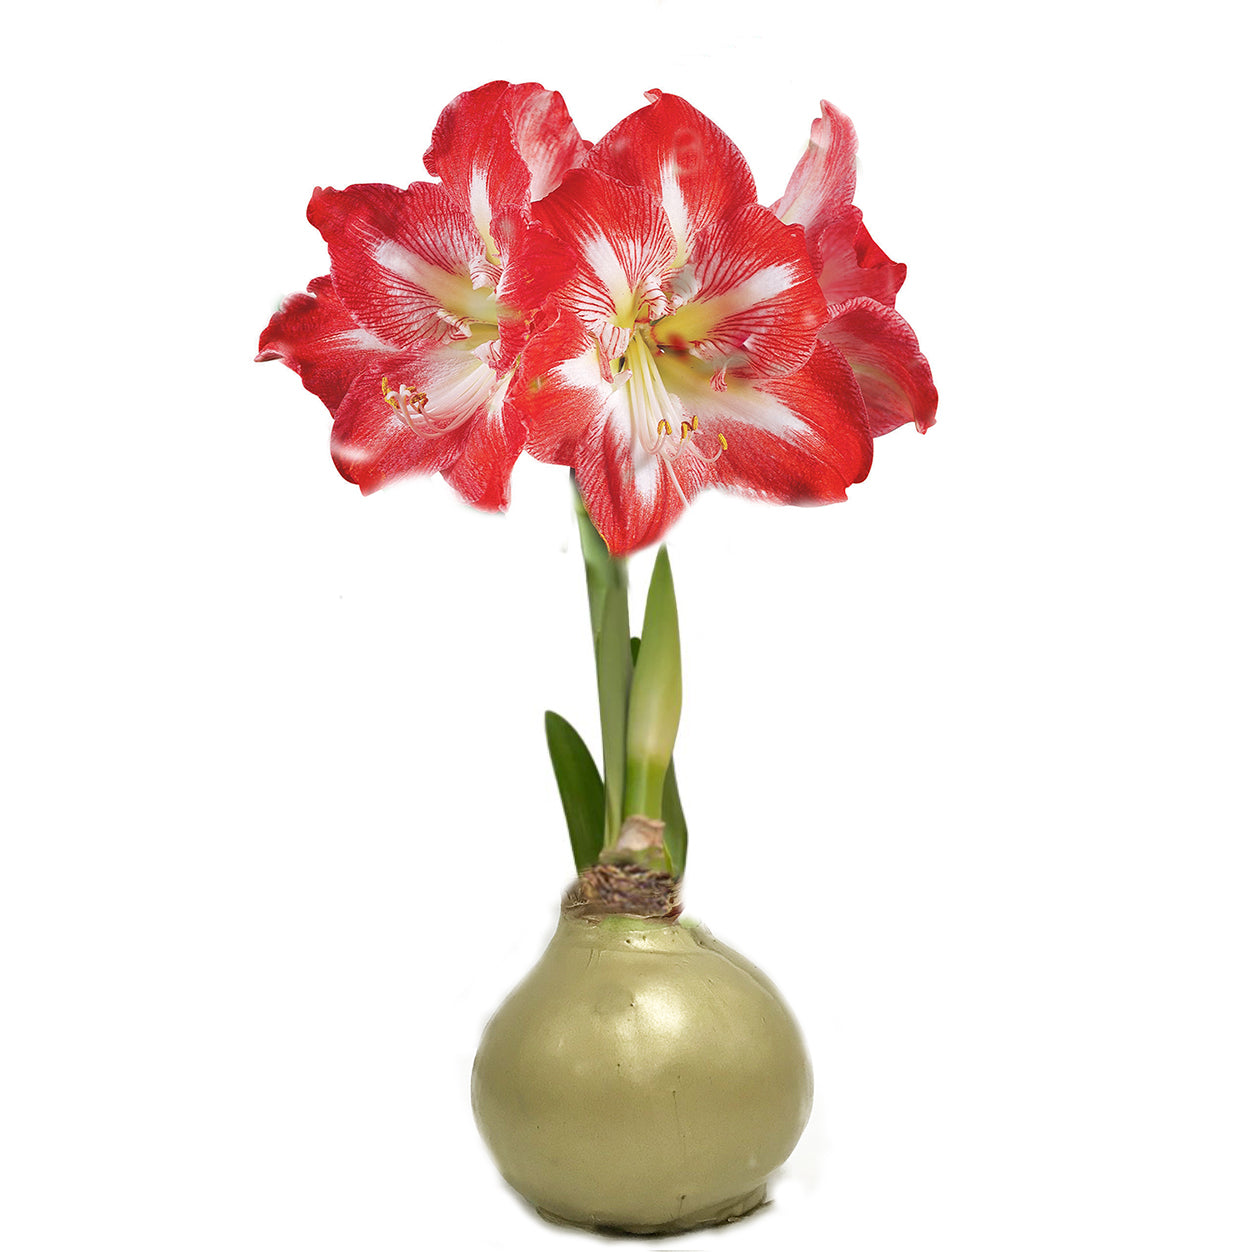 Gold Waxed Amaryllis Bulb, Peppermint Bloom - Sold Out